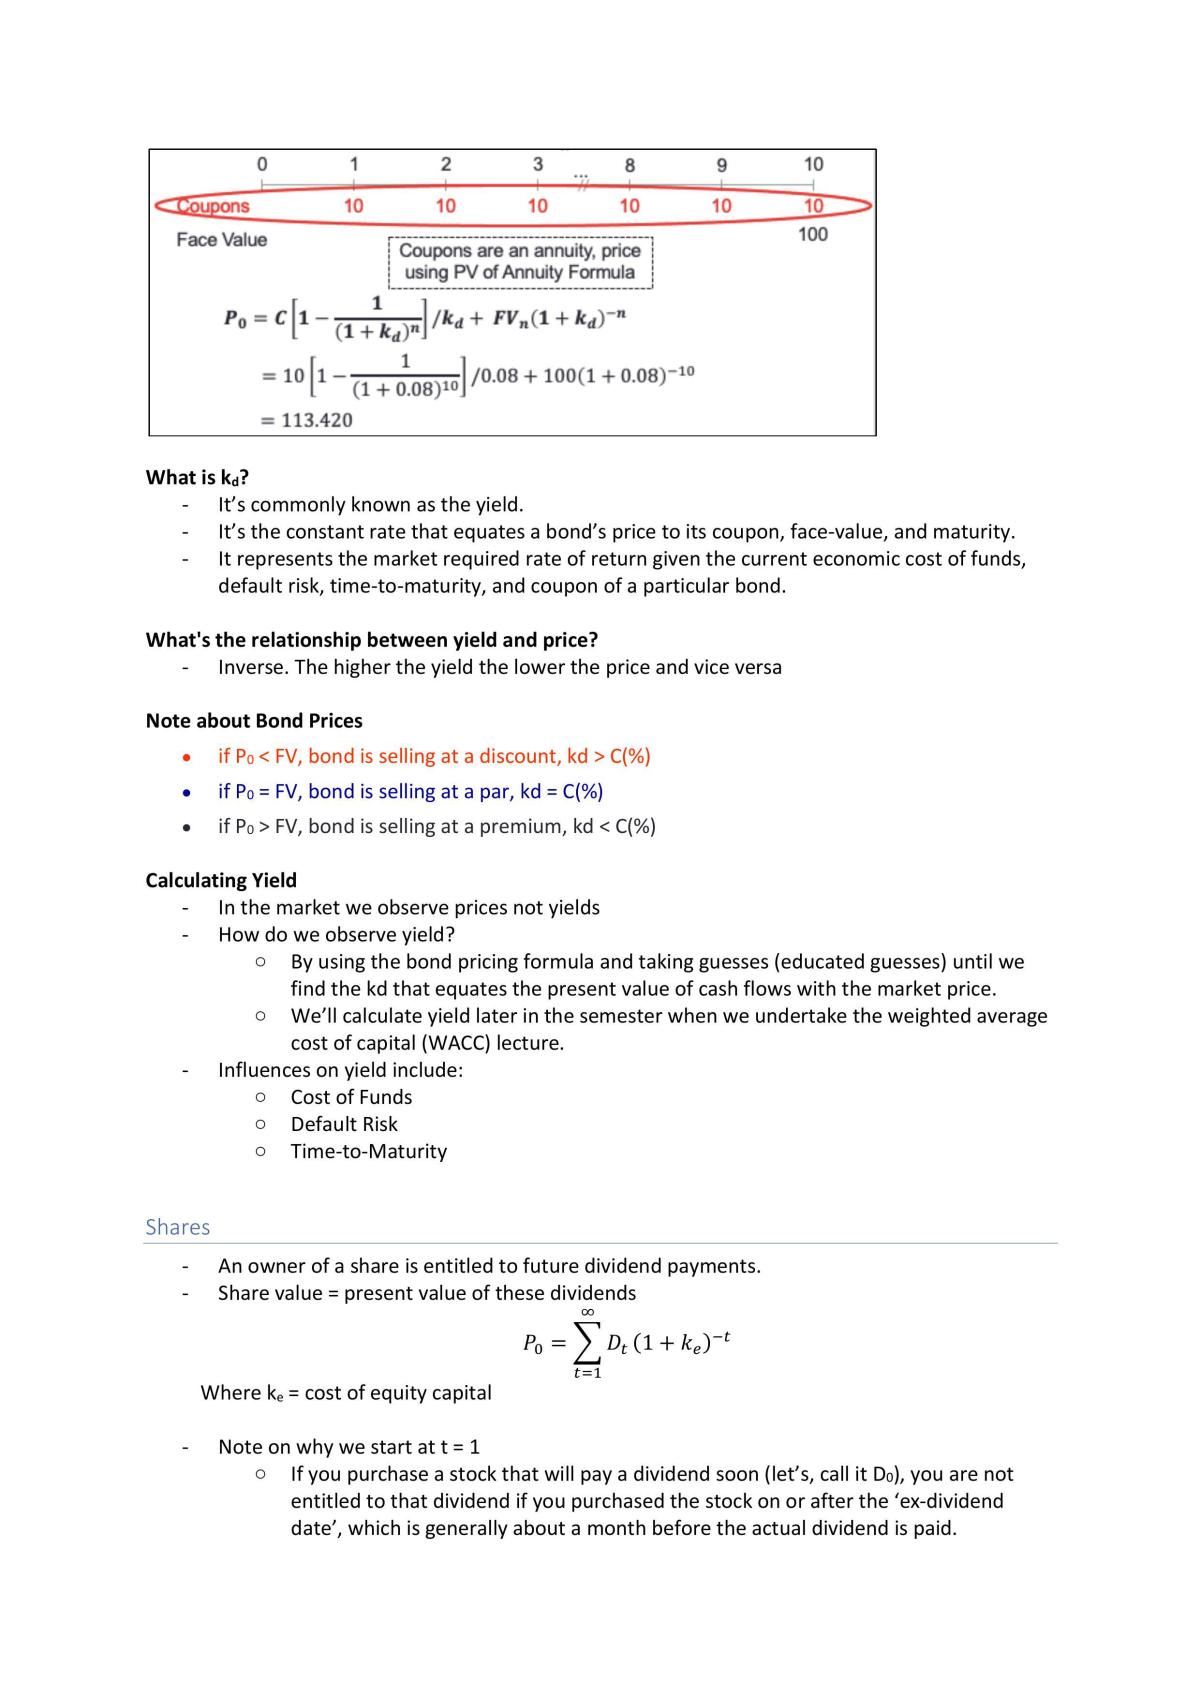 EFB210 Revision Notes for Mid-Sem - Page 18